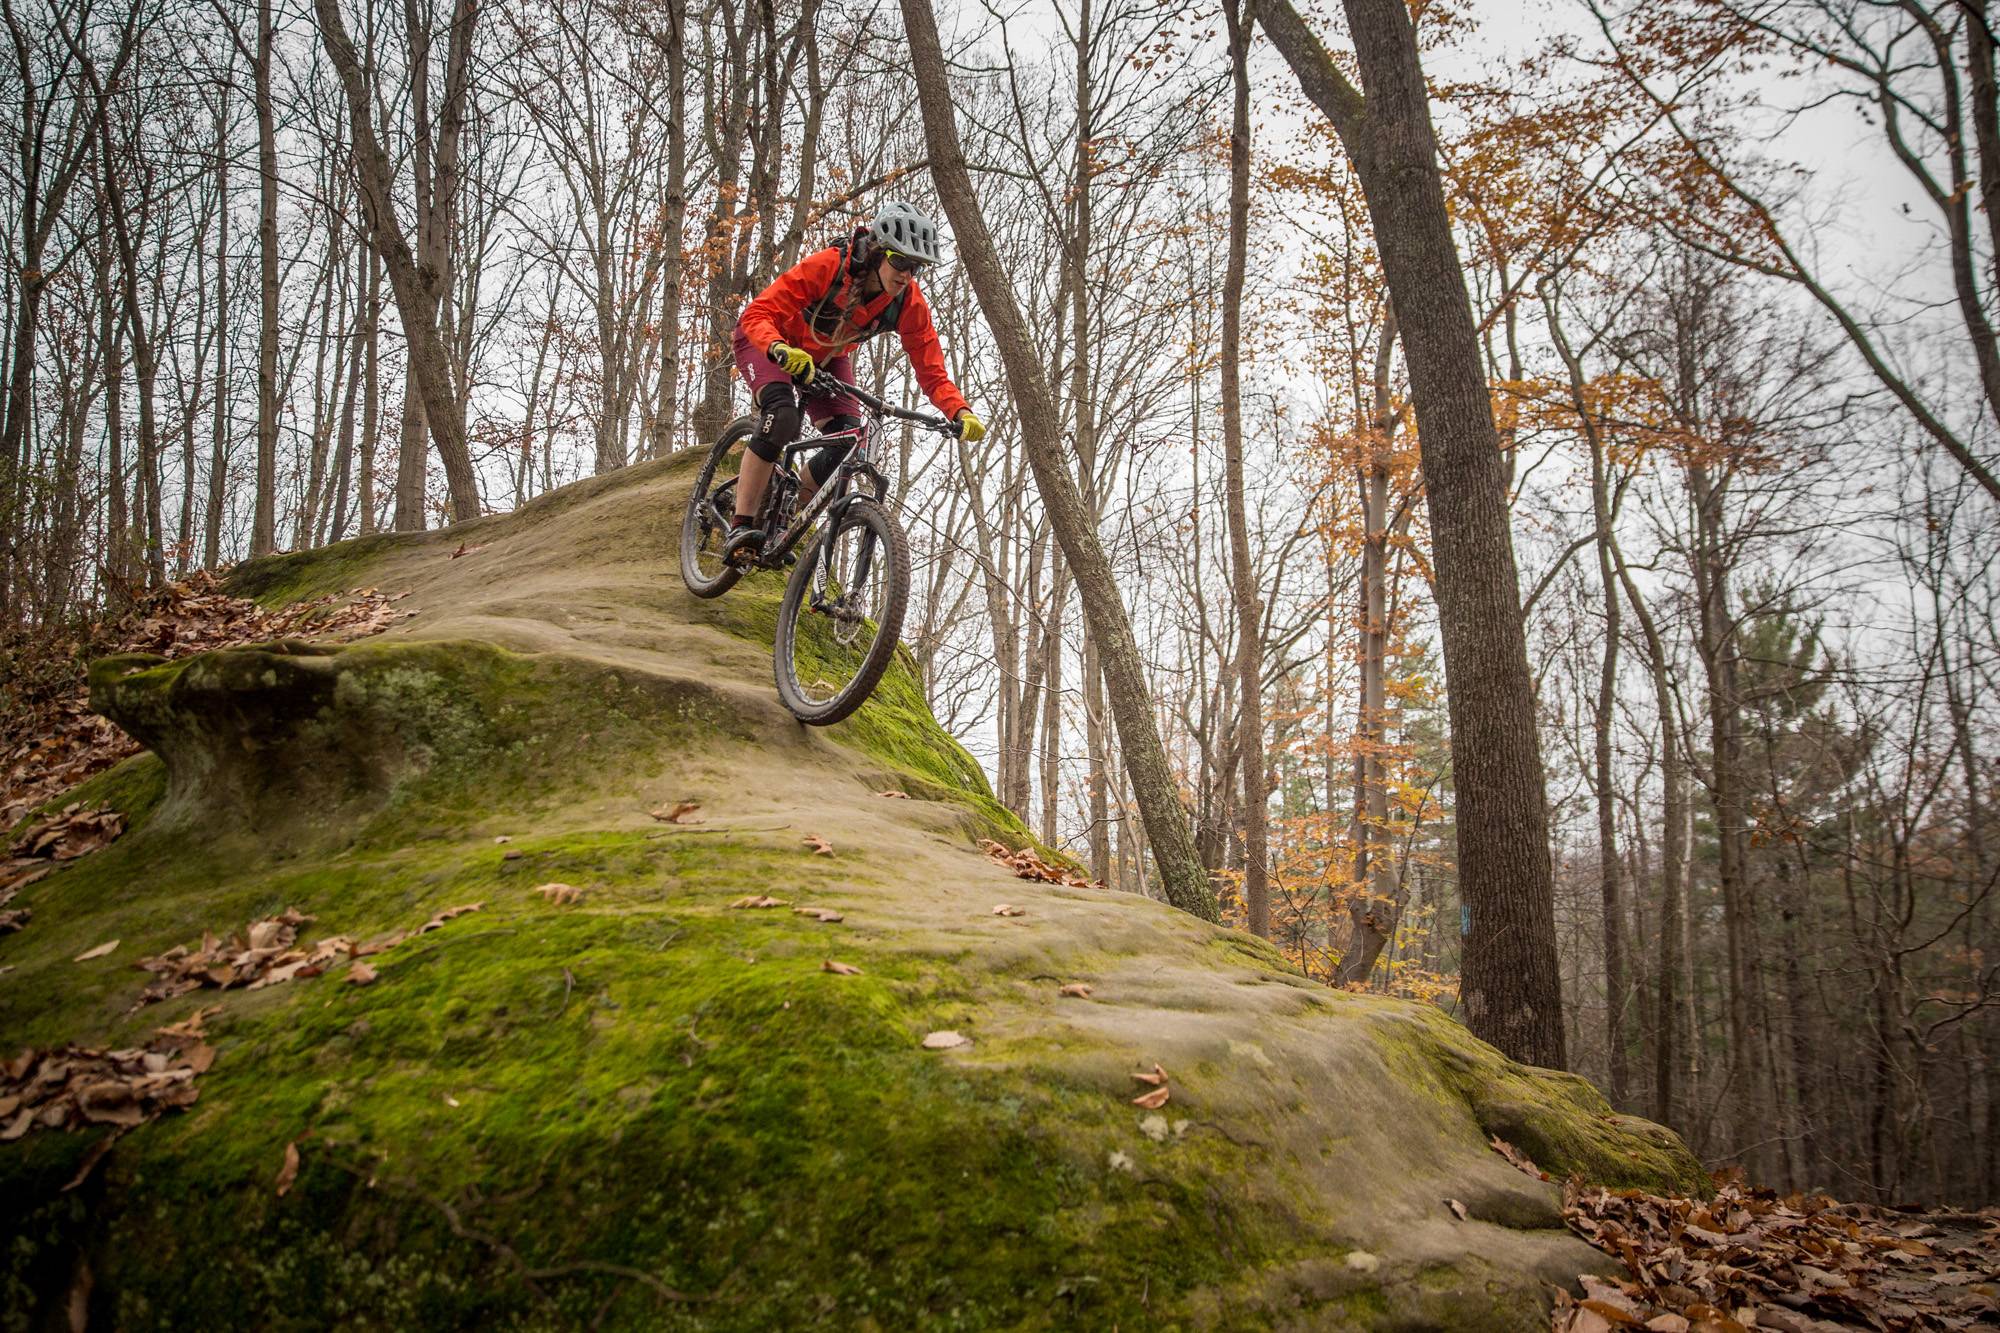 Photographs of mountain biking at Strouds Run State Park in Athens, Ohio.